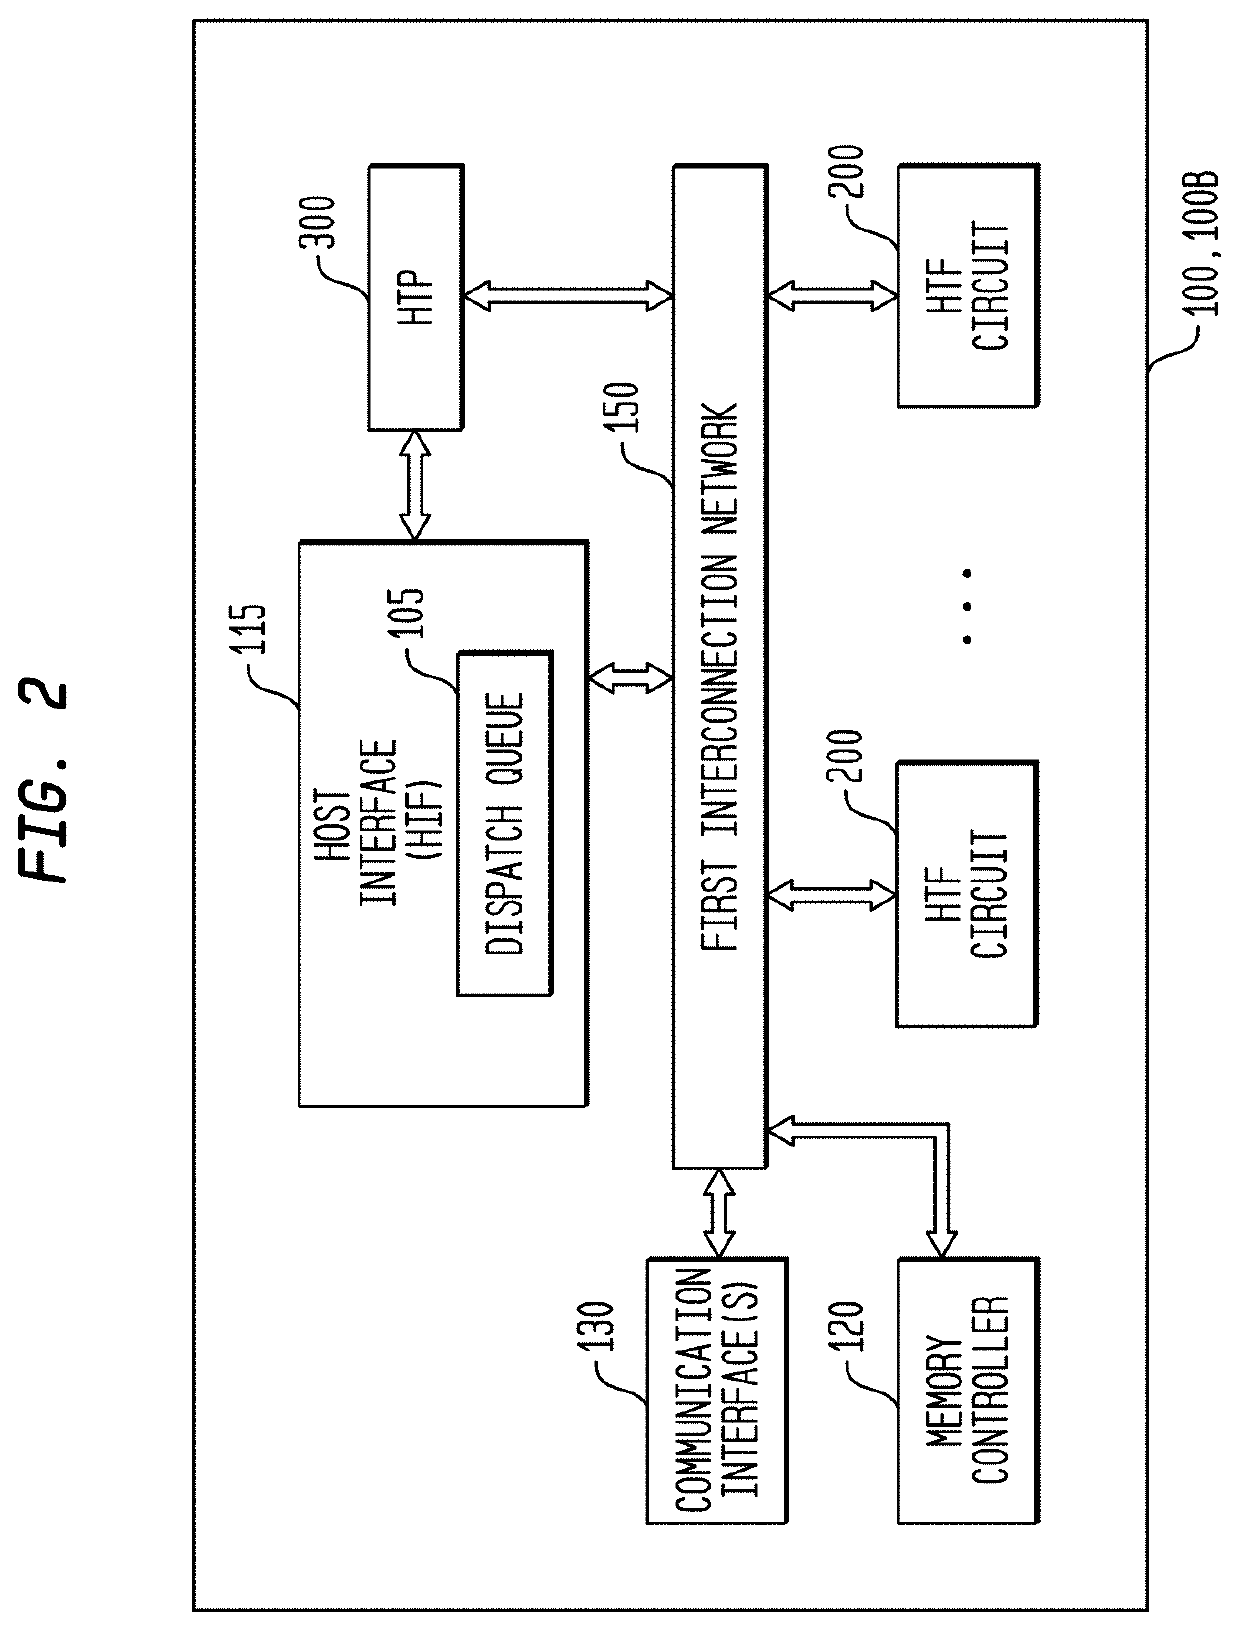 Computational Partition for a Multi-Threaded, Self-Scheduling Reconfigurable Computing Fabric